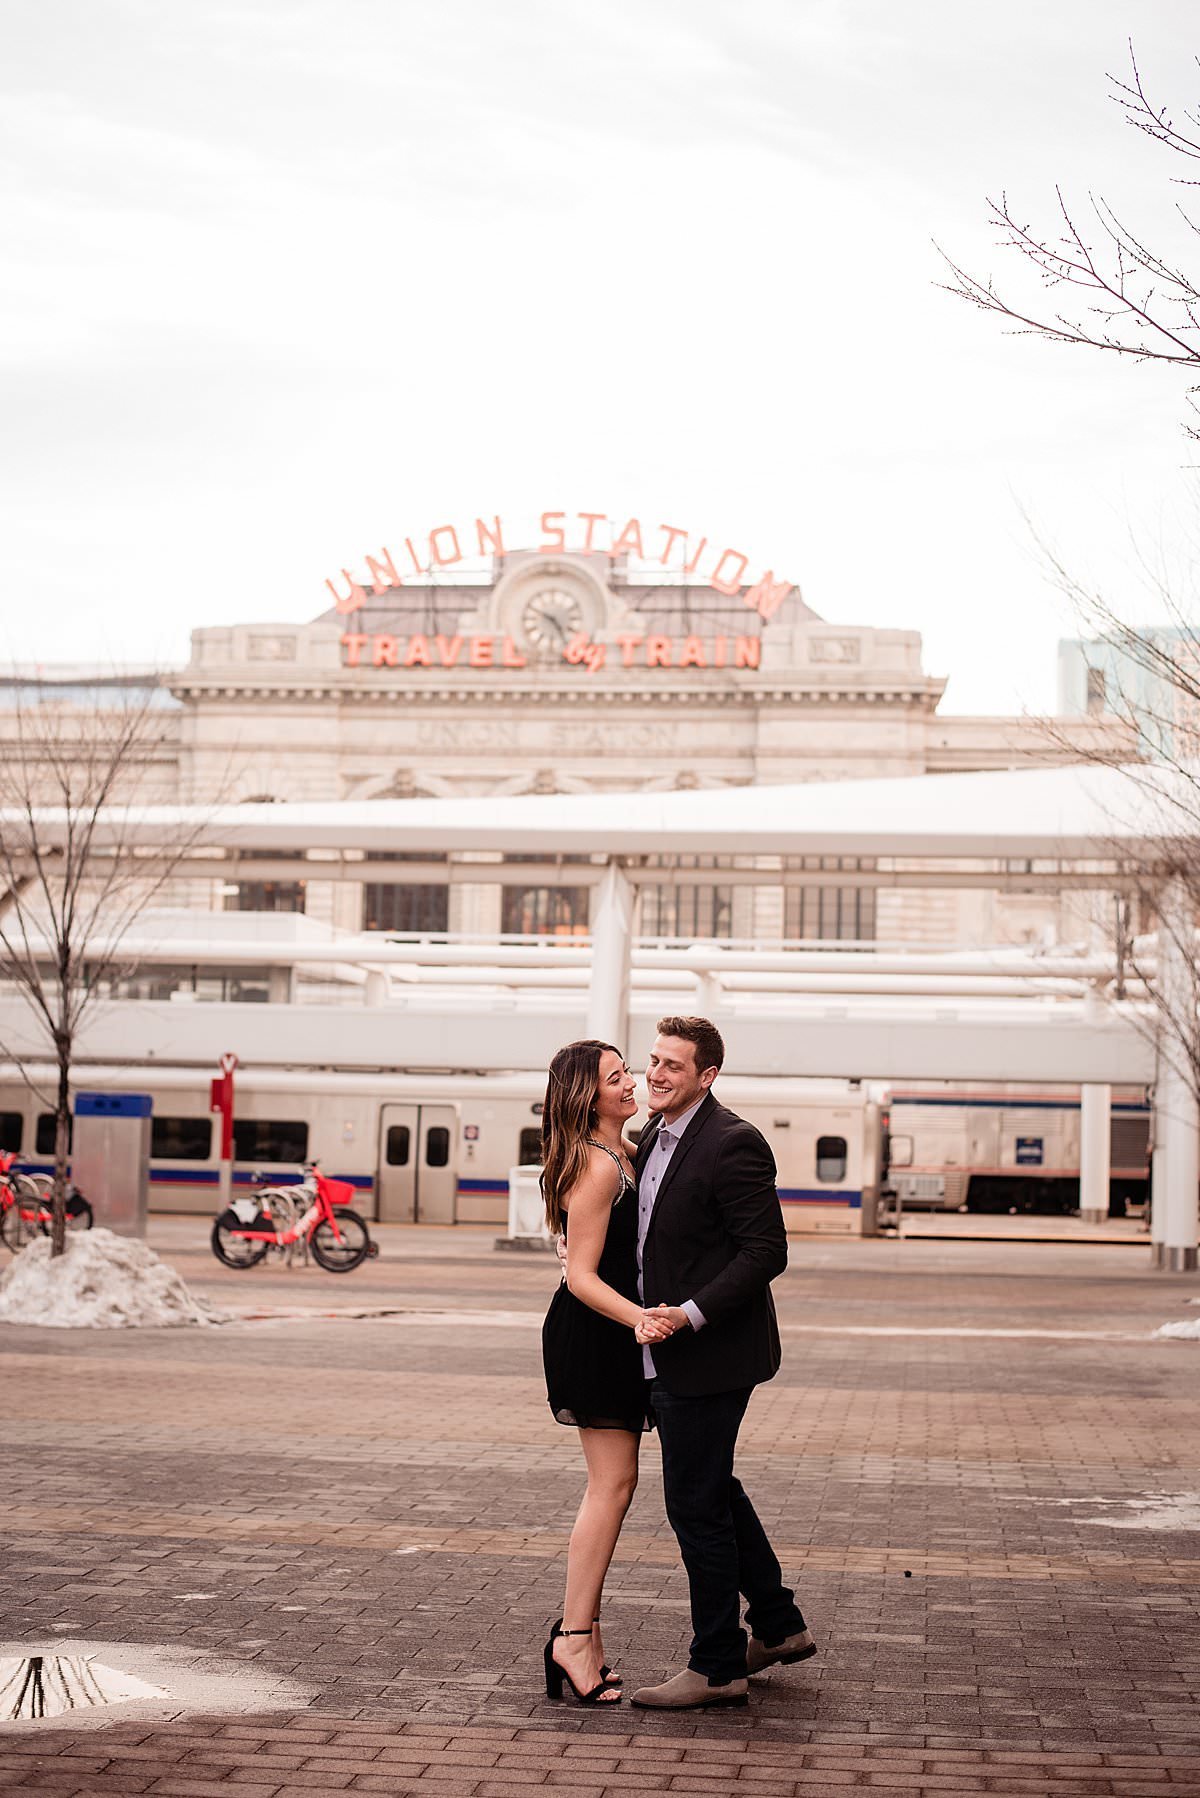 Couple dancing together with Union Station Denver in background